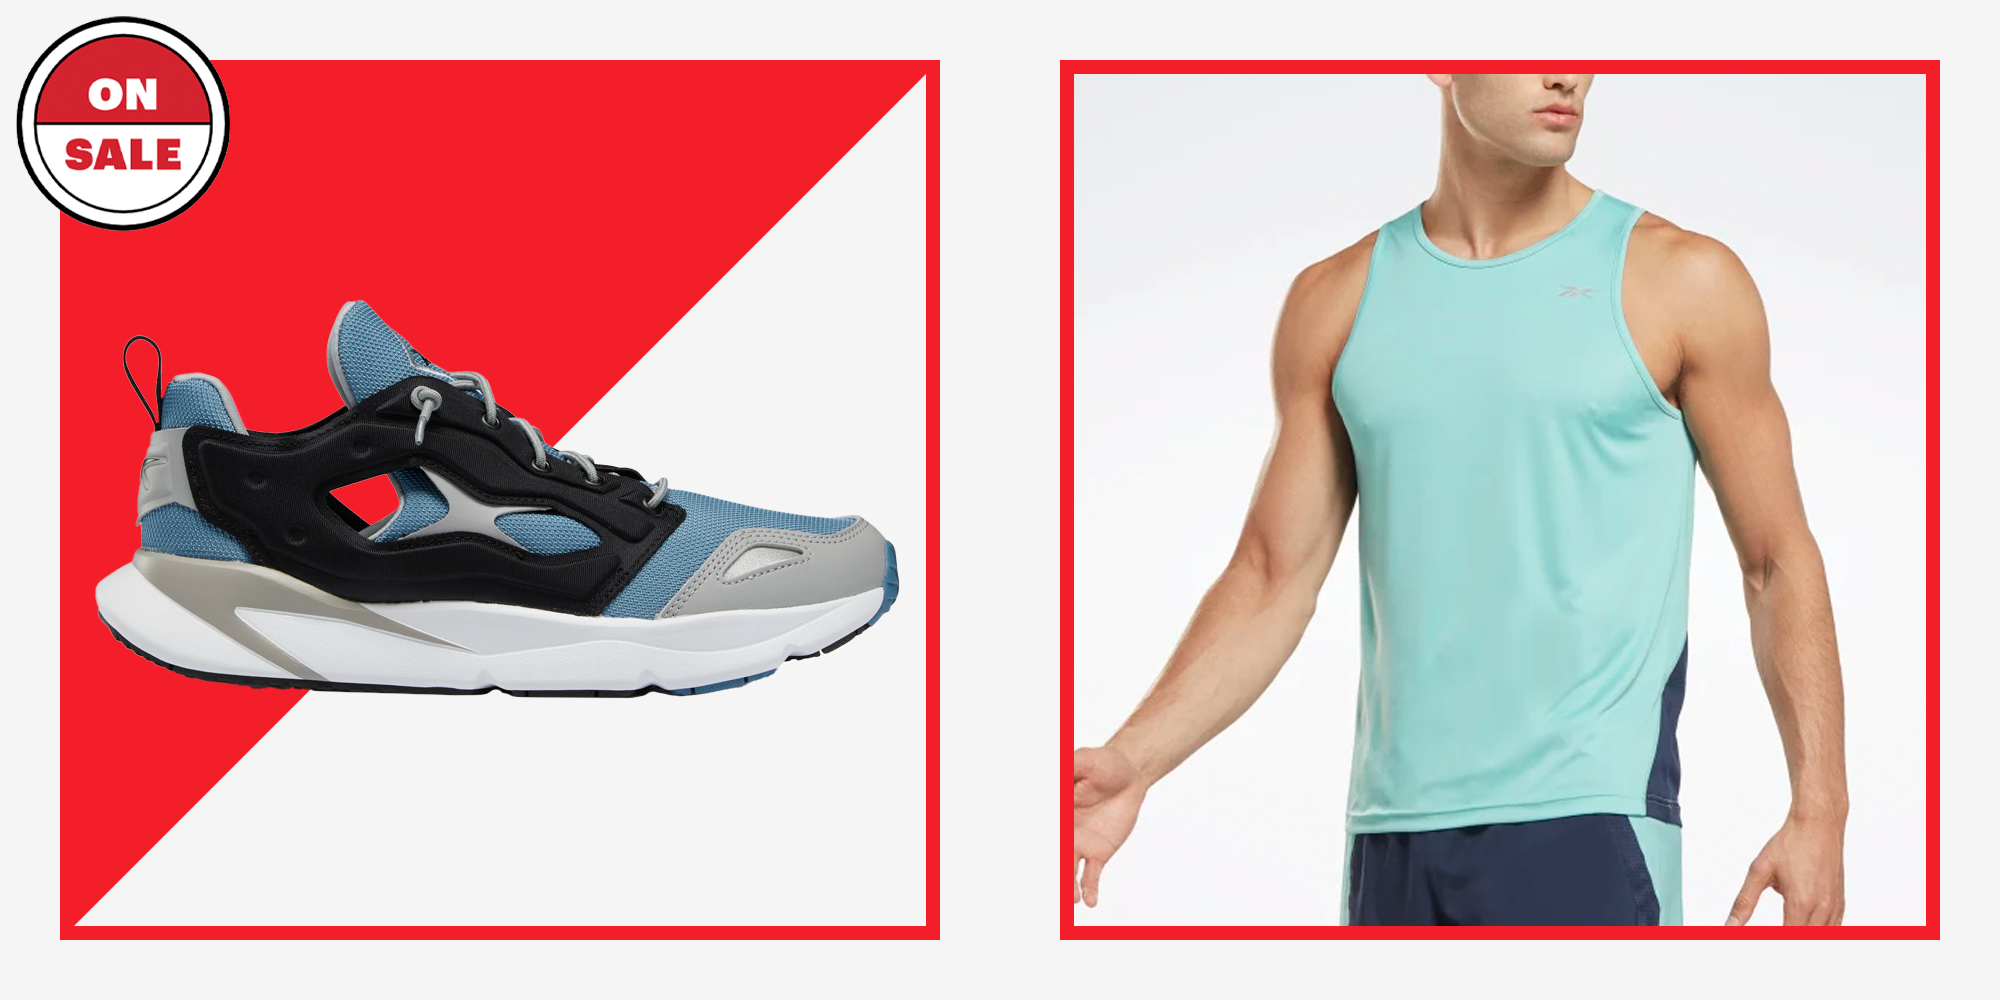 Reebok End of Season Sale 50% Off Shoes and Clothing